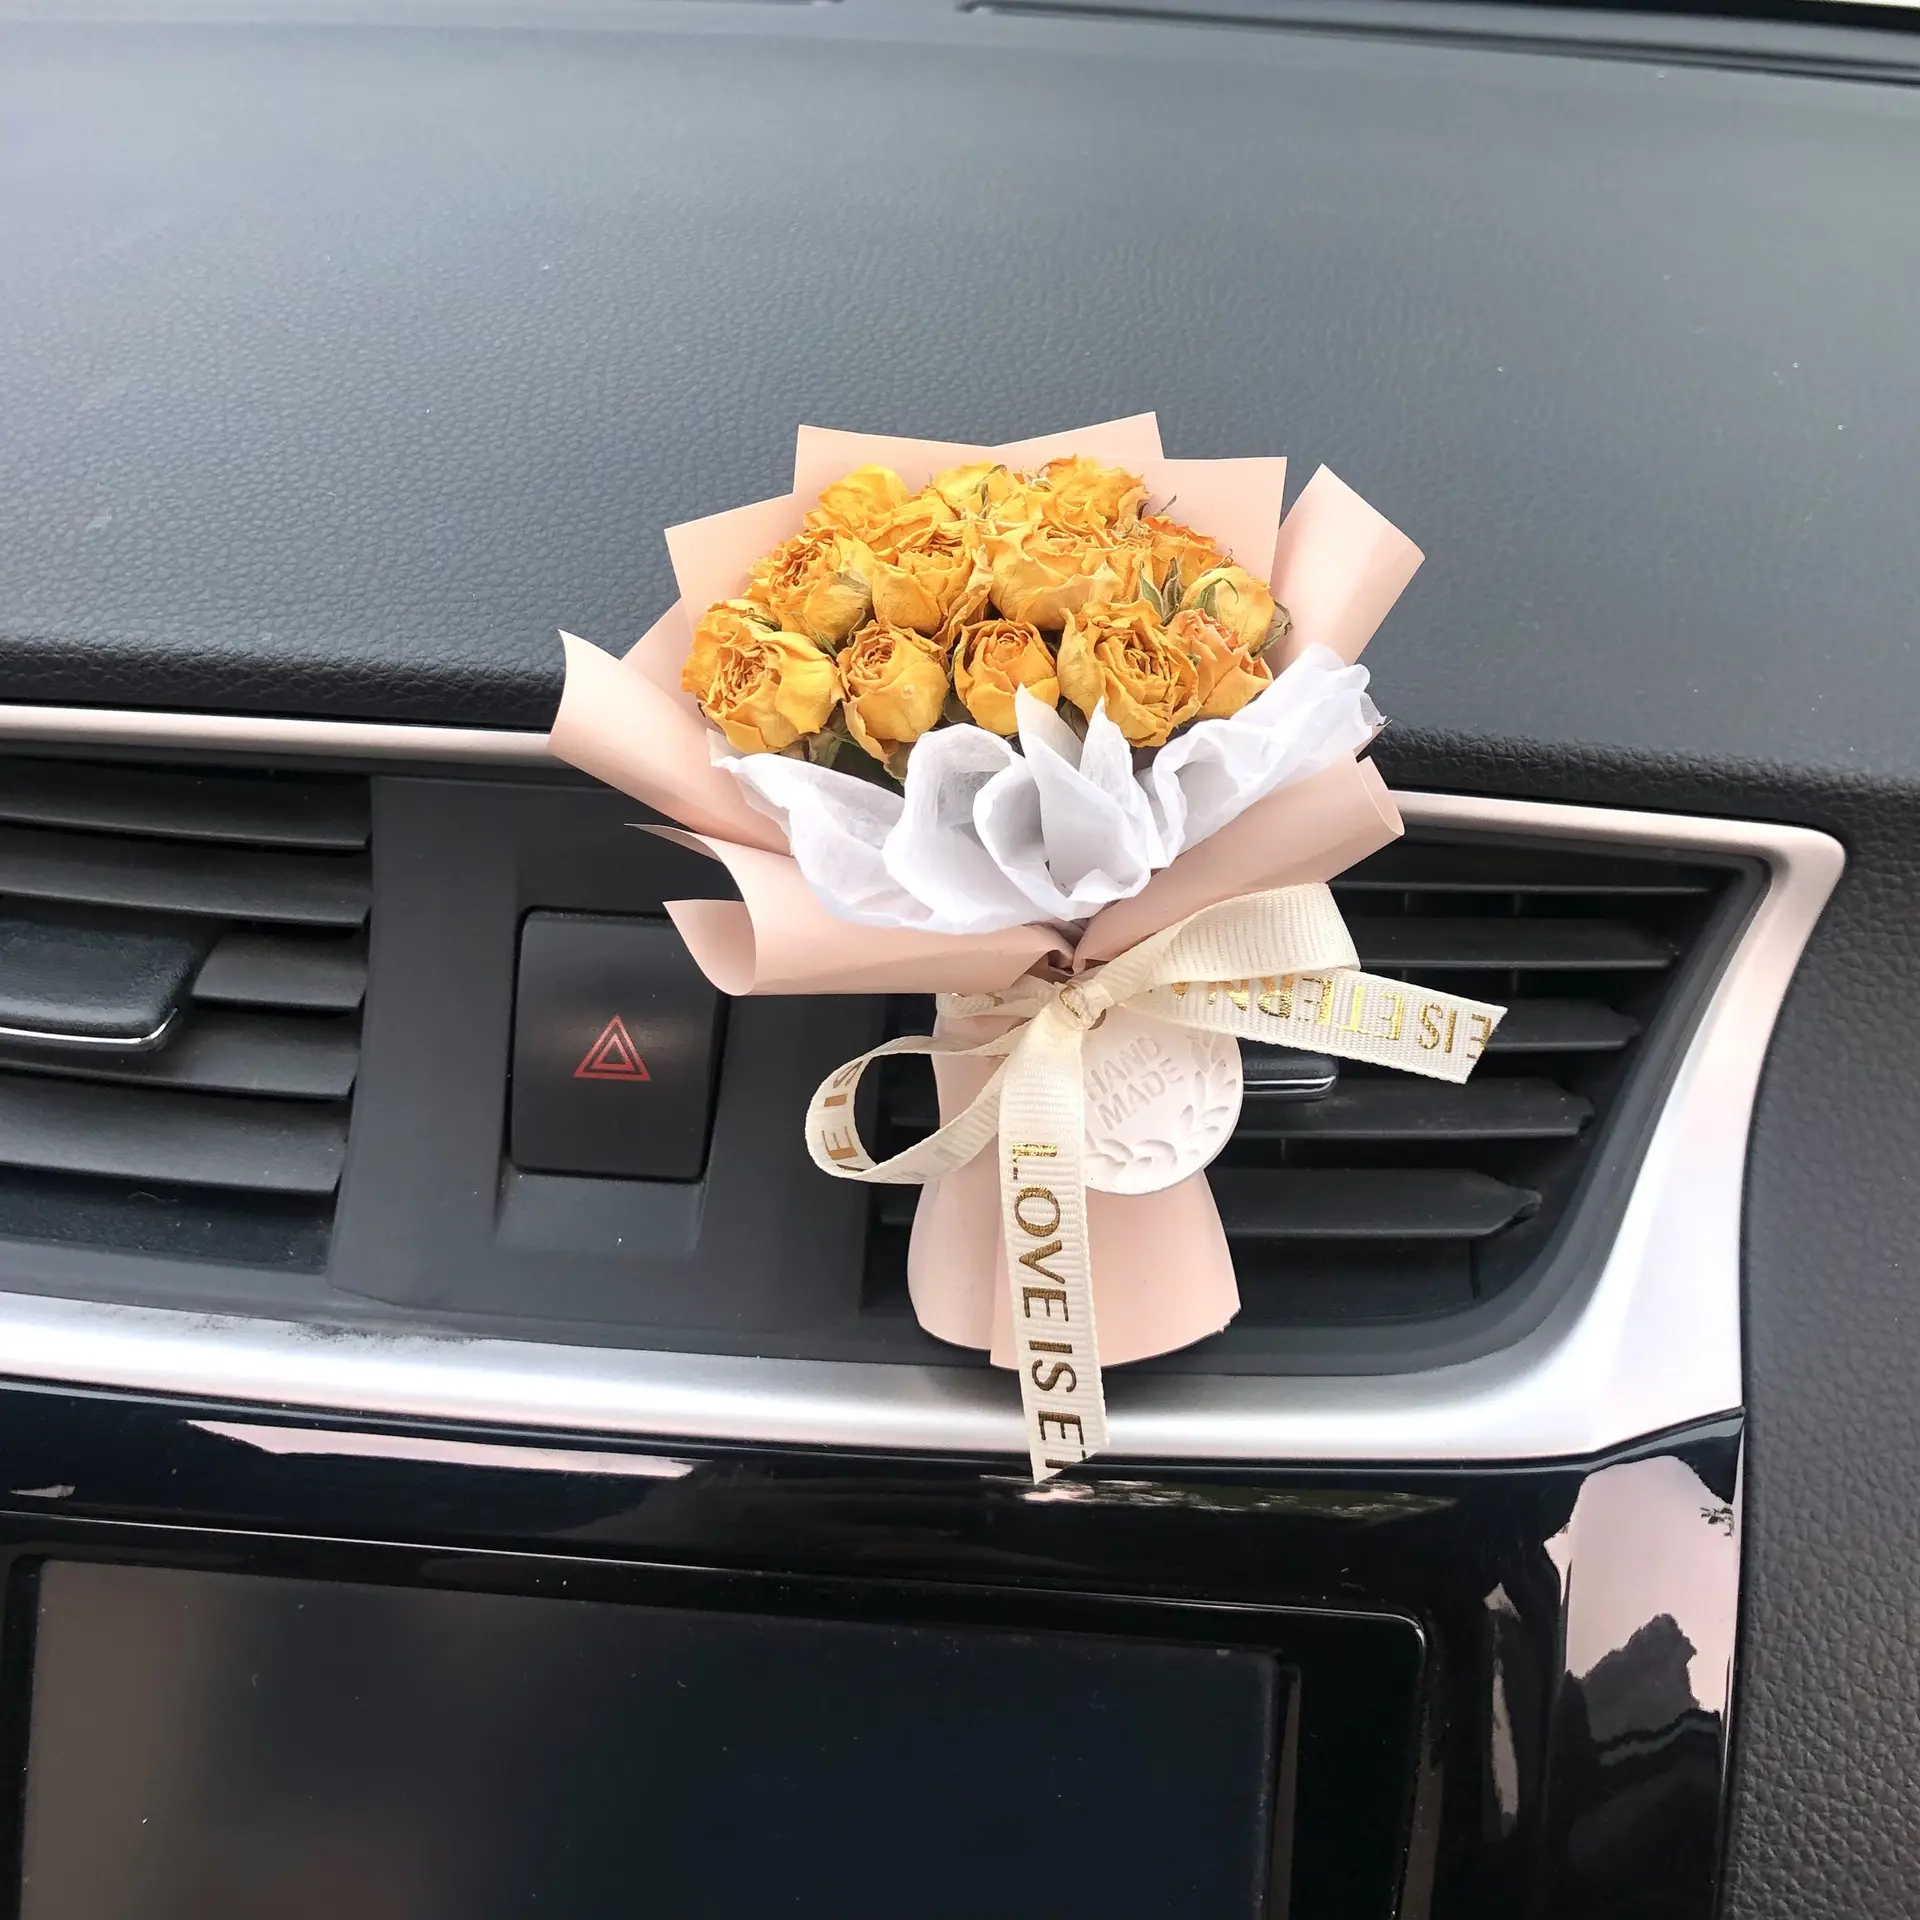 TX Car Universal Air Freshener Decorated With Exquisite Dried Flower Fragrance ClipFragrance Auto Accessories Interior Perfume